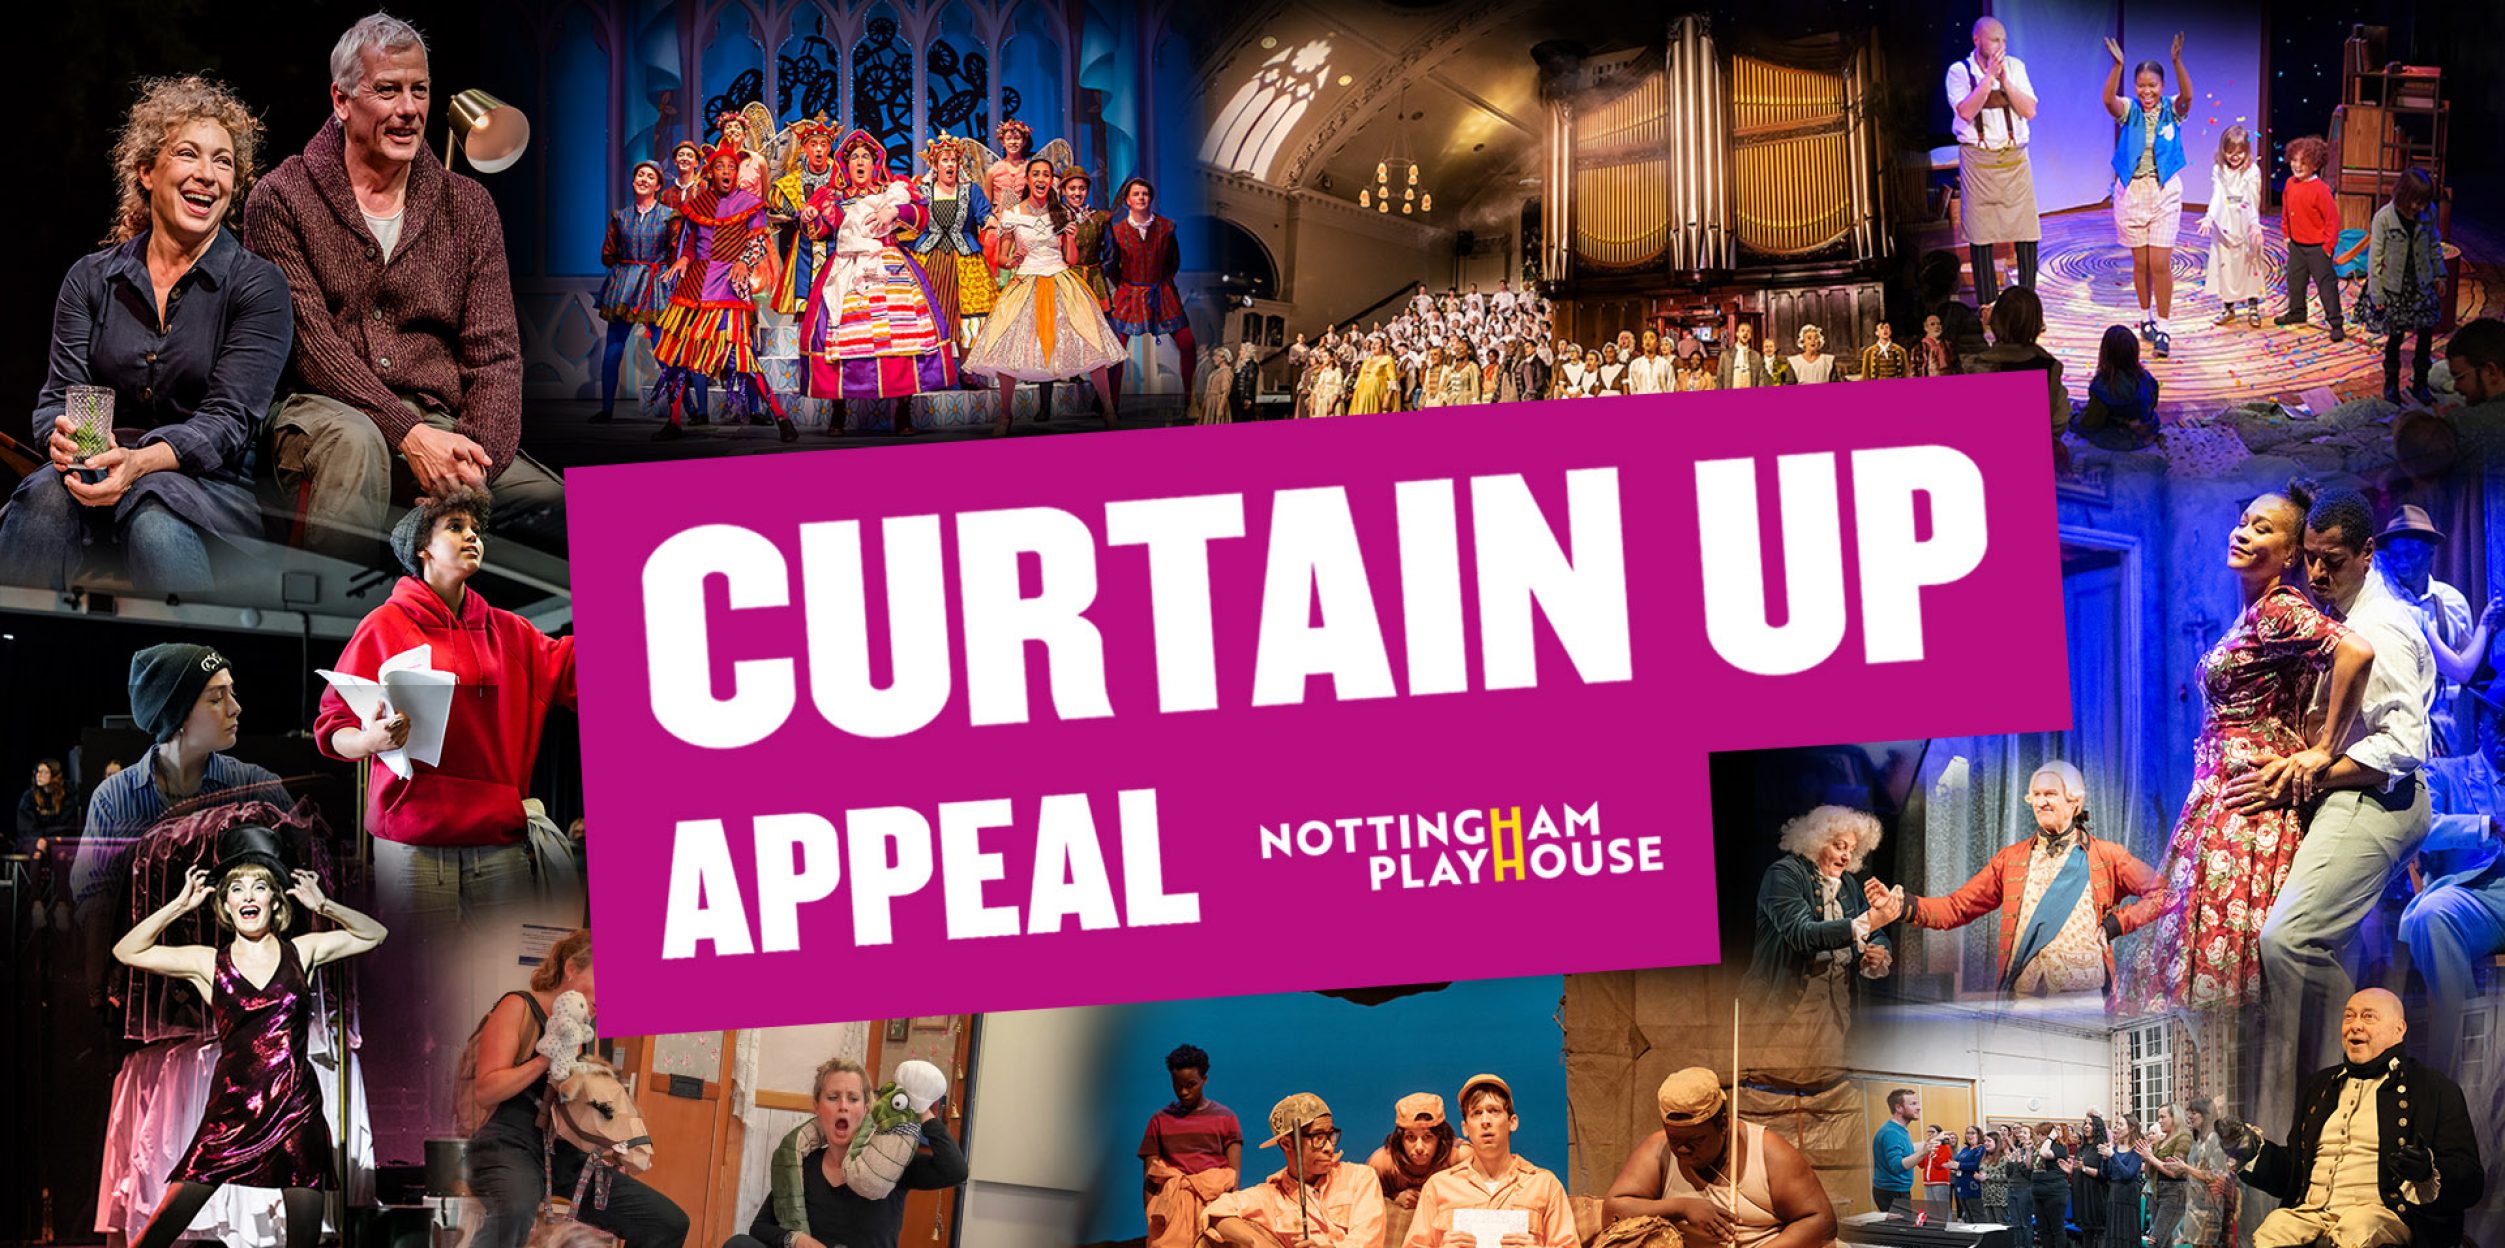 Curtain Up Appeal